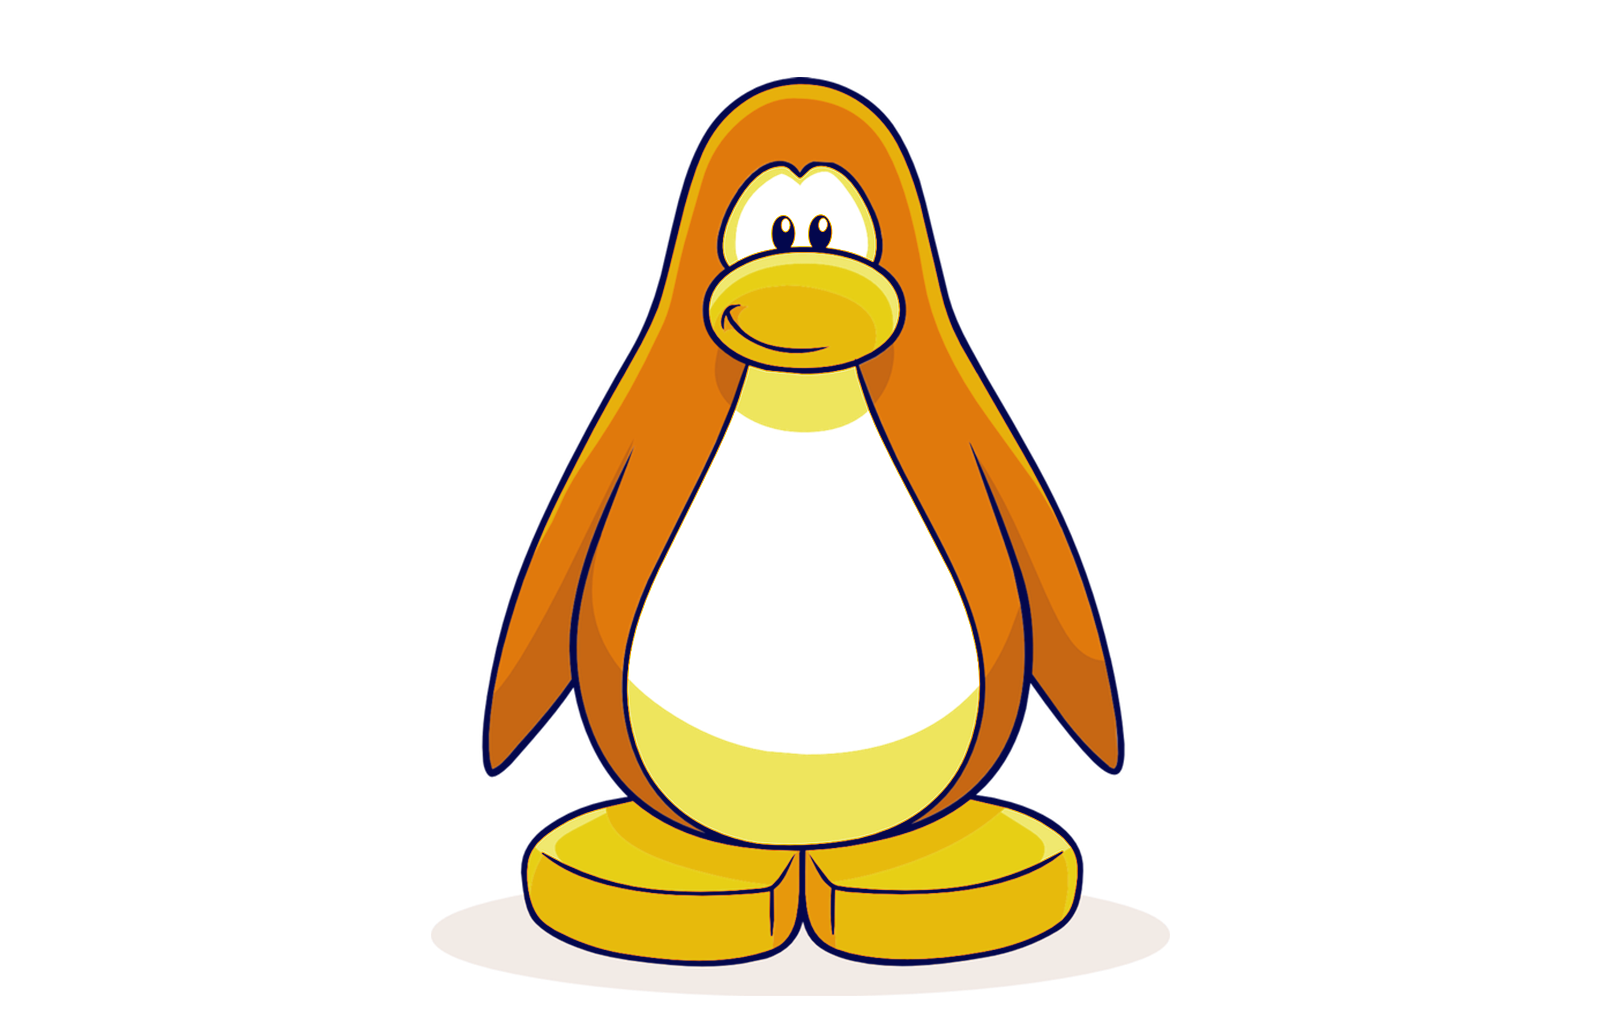 I remade Club Penguin Minigames in my own style, (AND YOU CAN PLAY